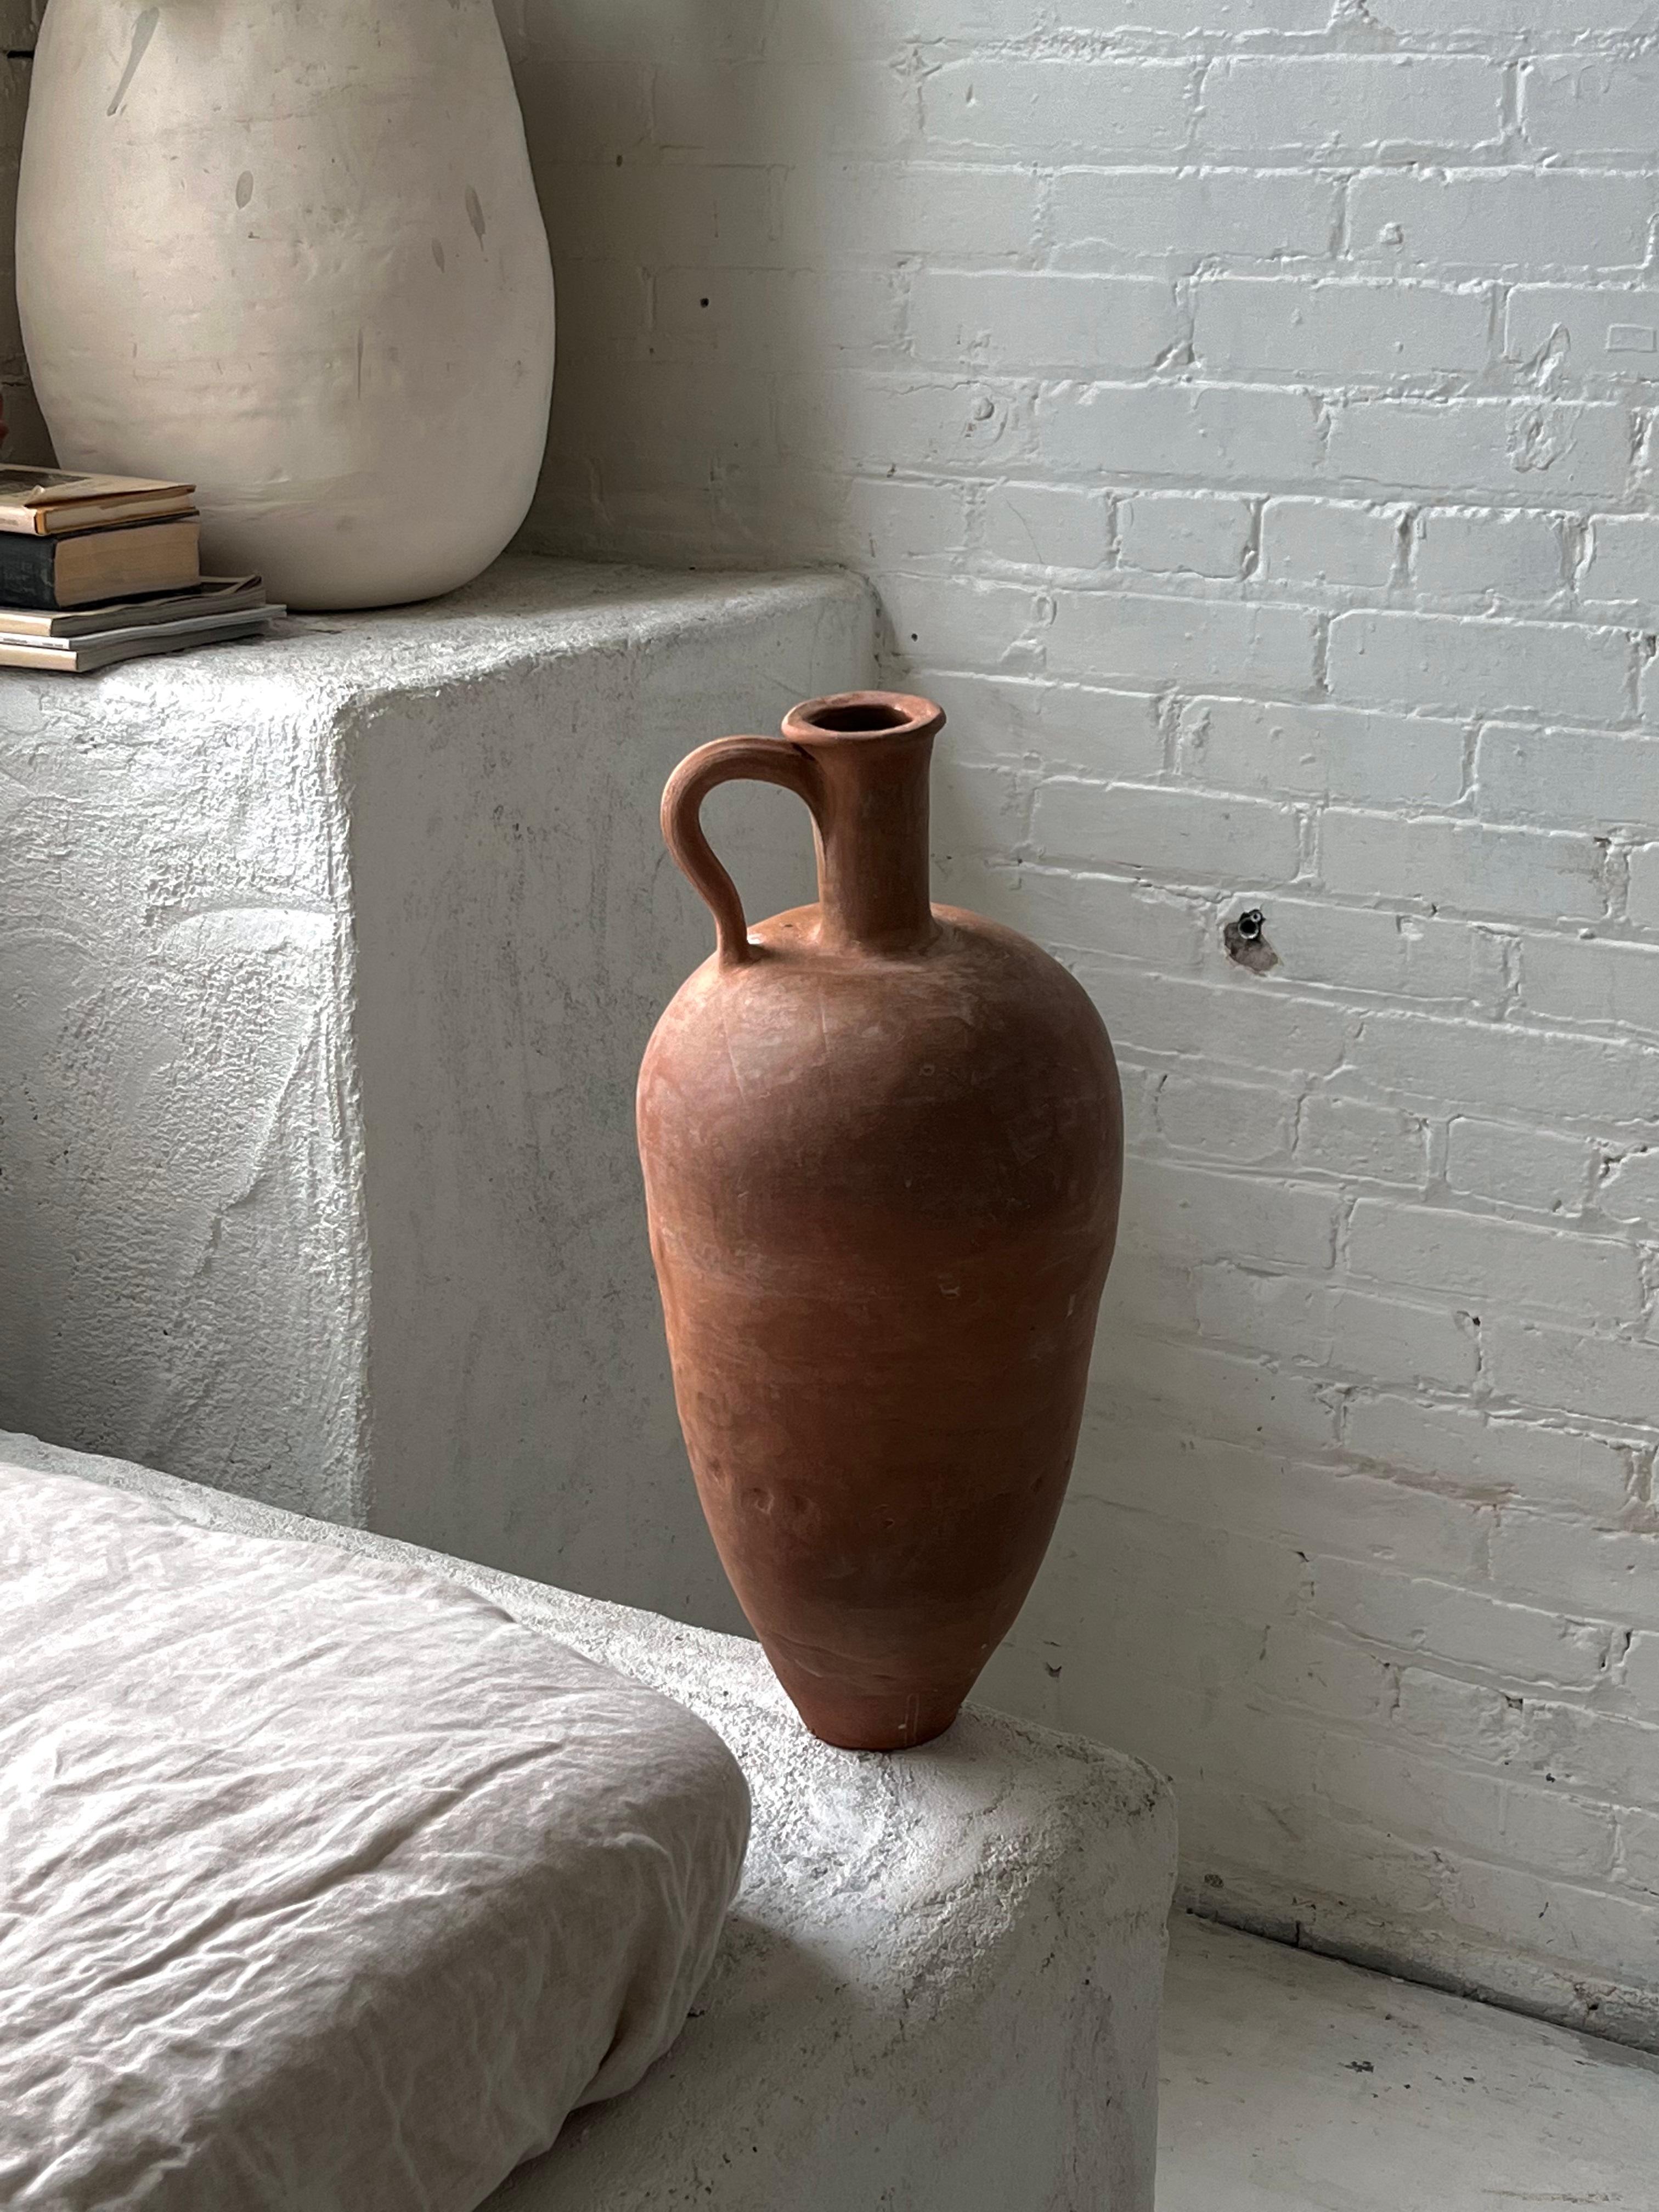 Red Large Jug by Solem Ceramics
Dimensions: Ø 25.5 x H 48.5 cm.
Materials: Red stoneware, glaze.
This jug is water safe. Please contact us.

Solem’s work pulls from memories of the architecture and community within SWANA and Southeast Asia thorough